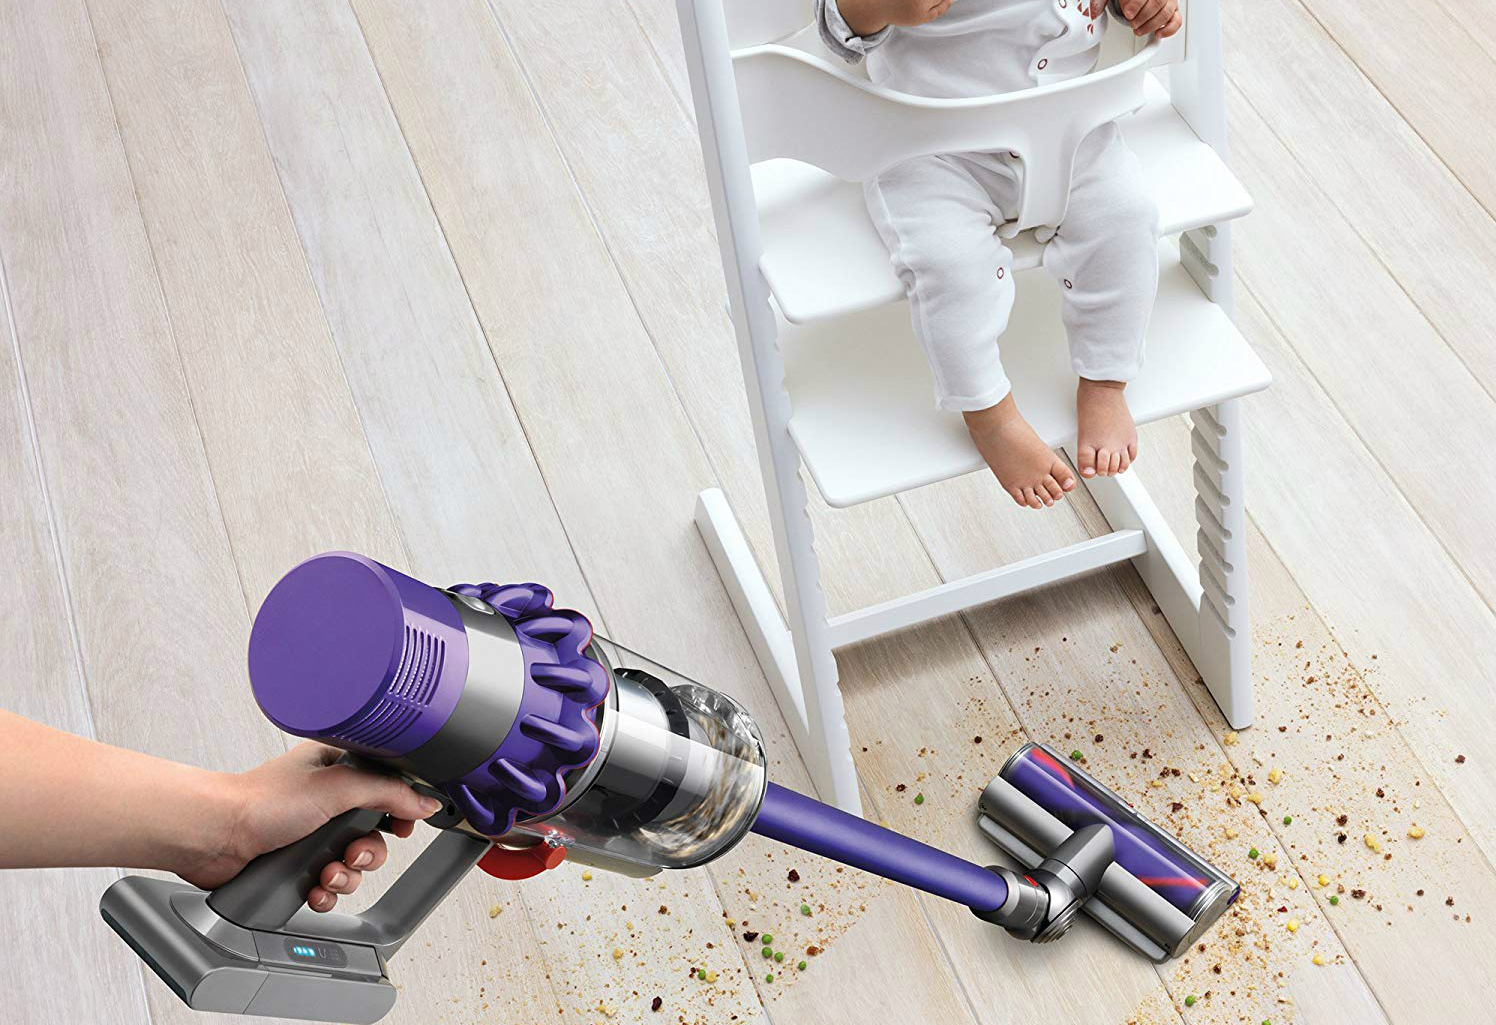 The Dyson Cyclone V10 Animal cordless vacuum cleaning a mess made by a baby.